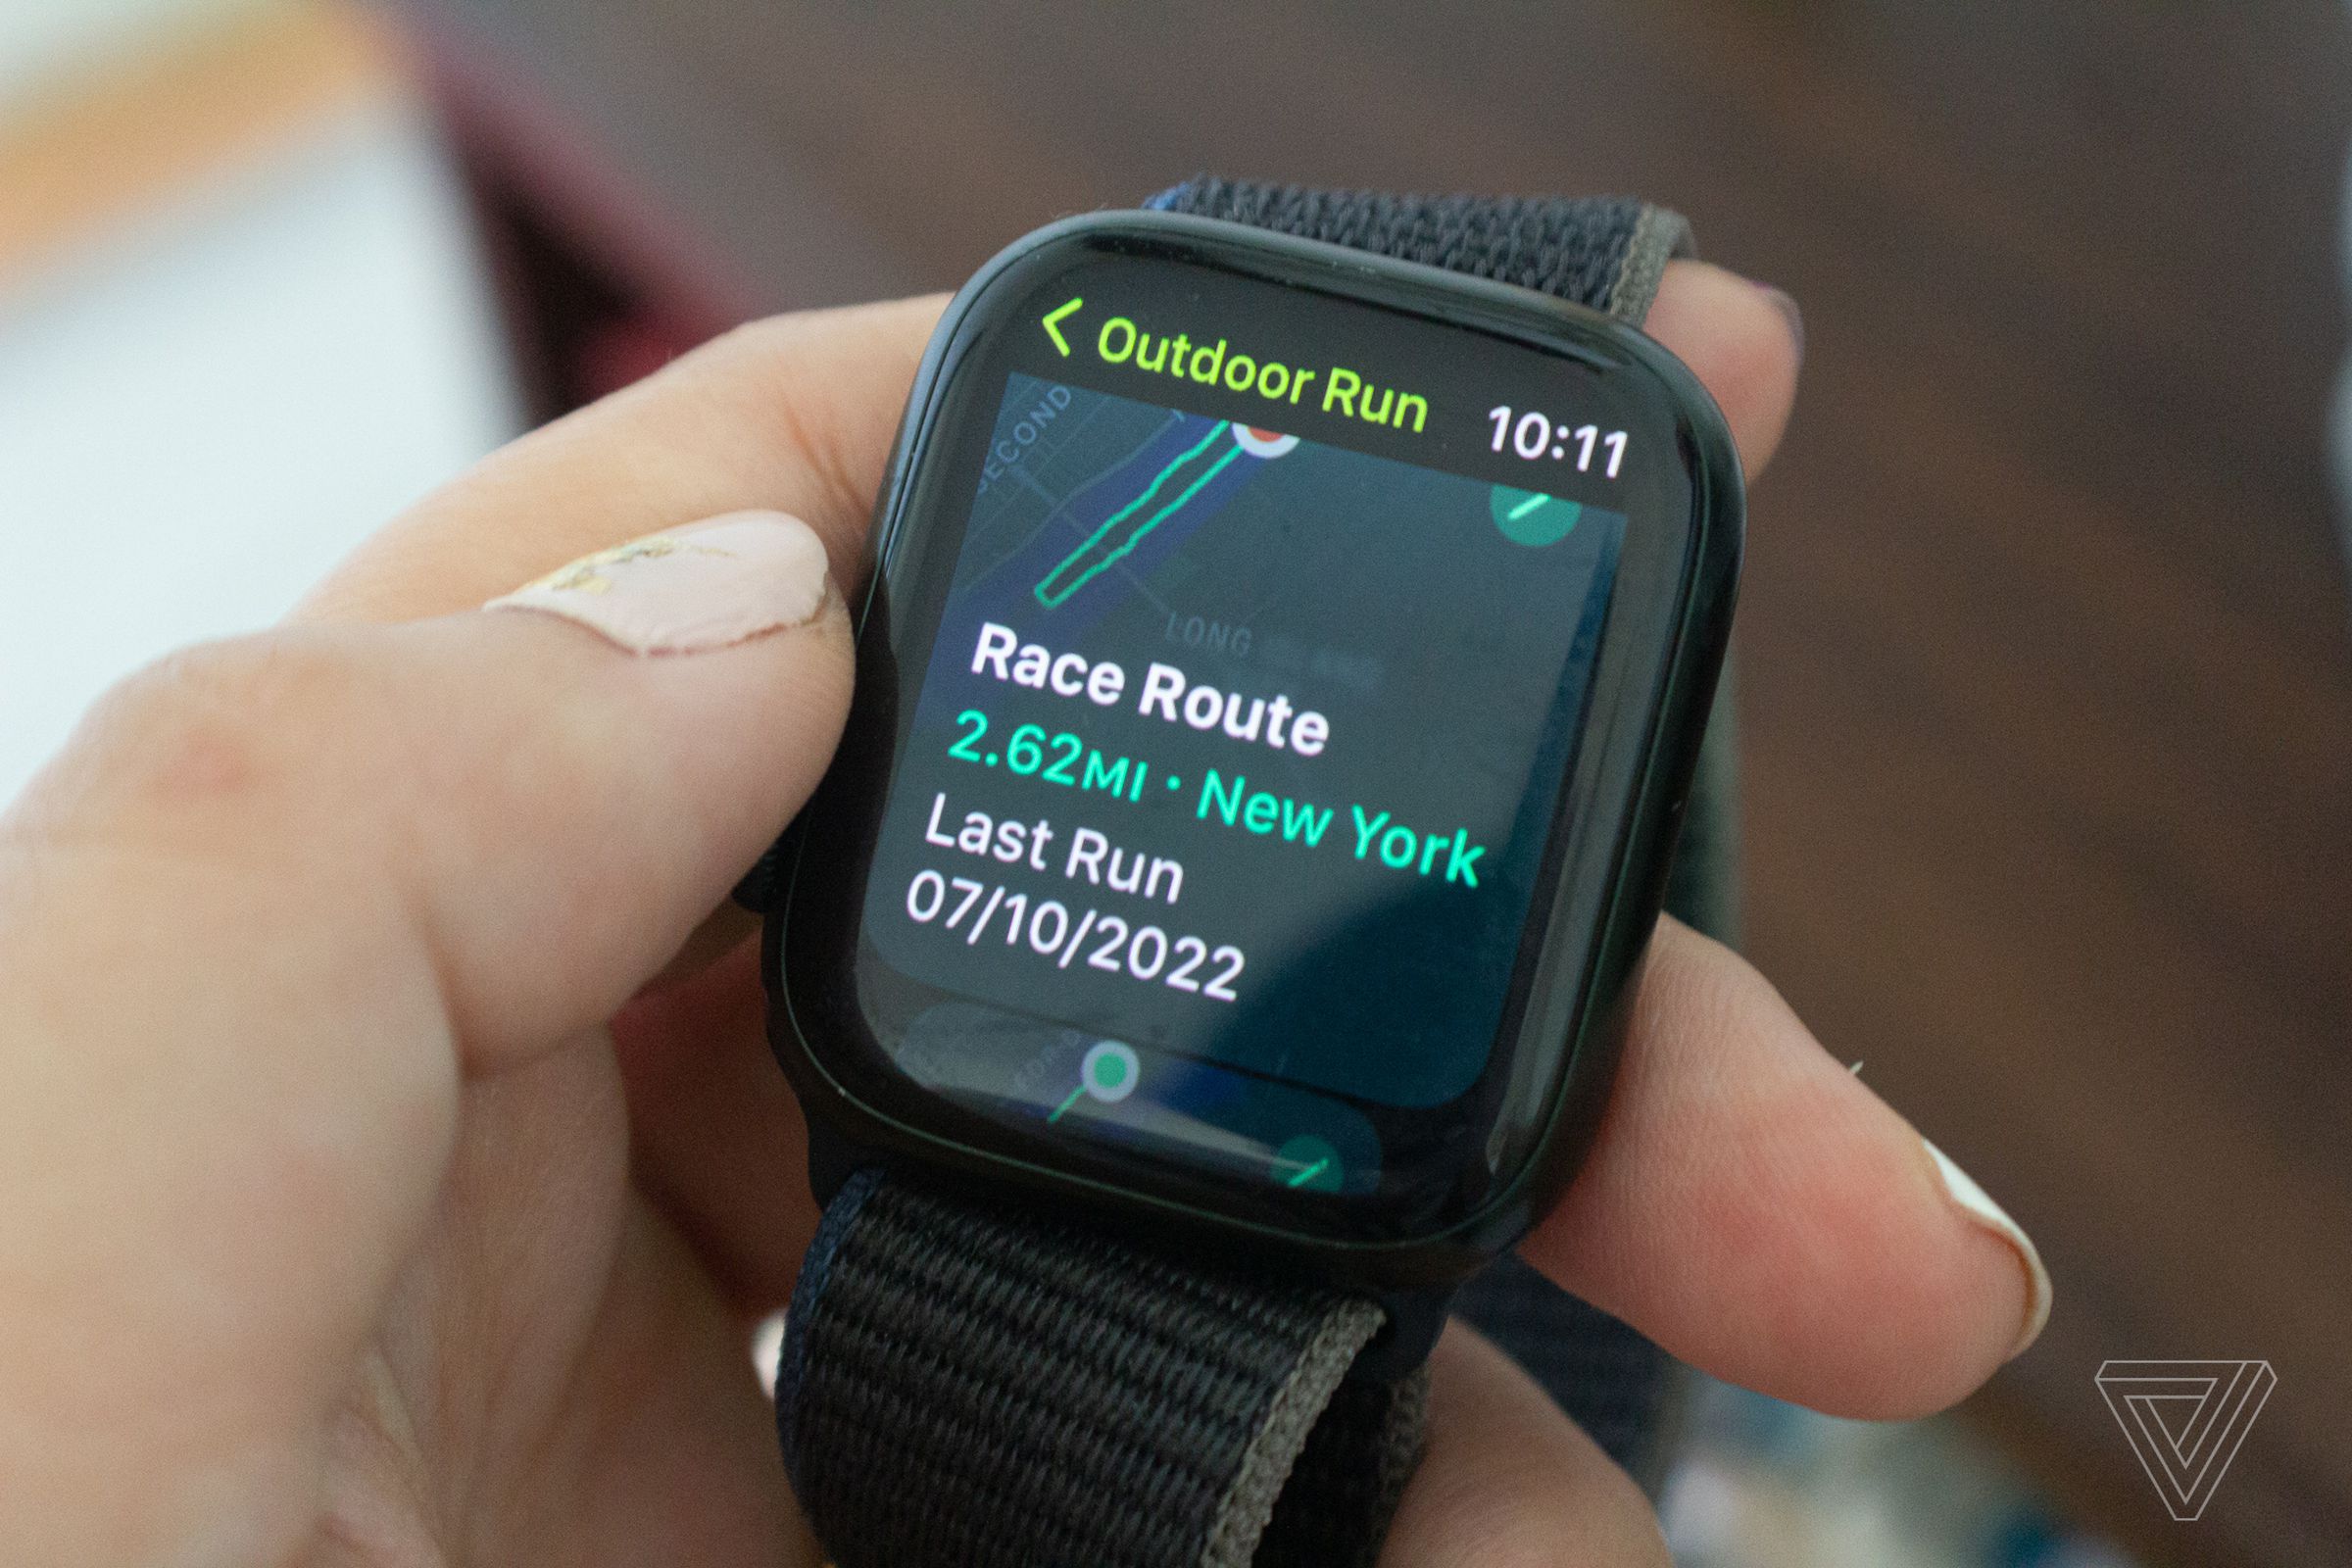 The Race Route workout displayed on a Apple Watch Series 7